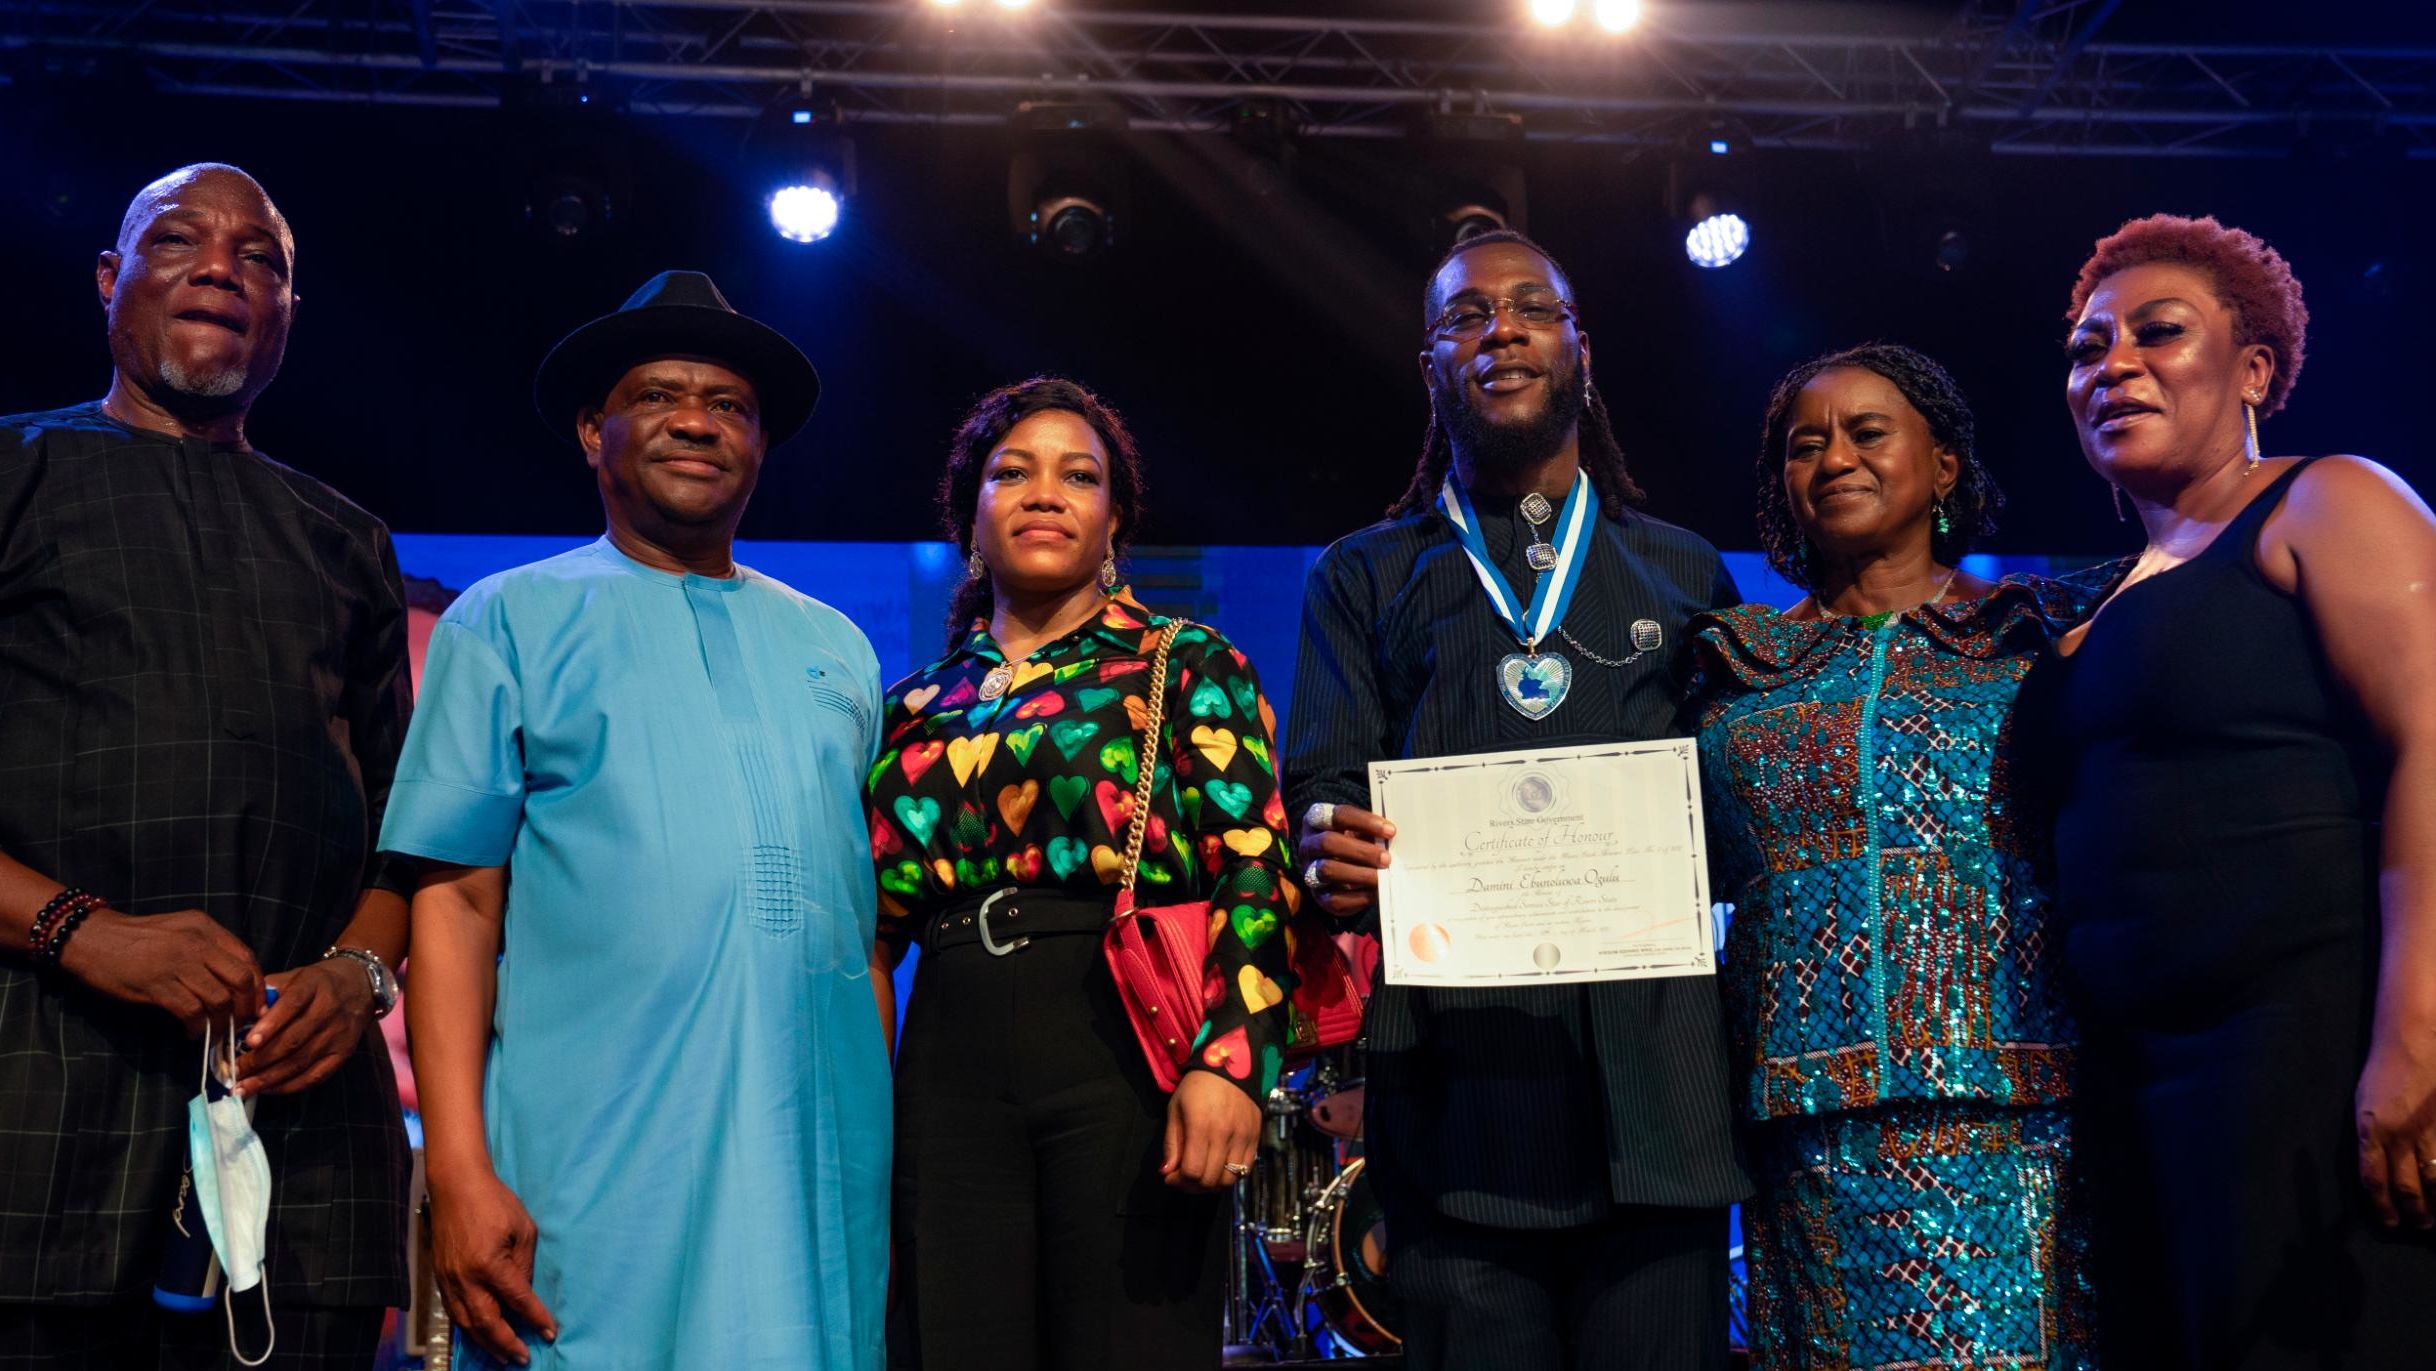 Burna Boy, joined by his father (far left) and mother (far right) received a proclamation from the governor of Rivers State, Nigeria, Ezenwo Nyesom Wike (second from left).